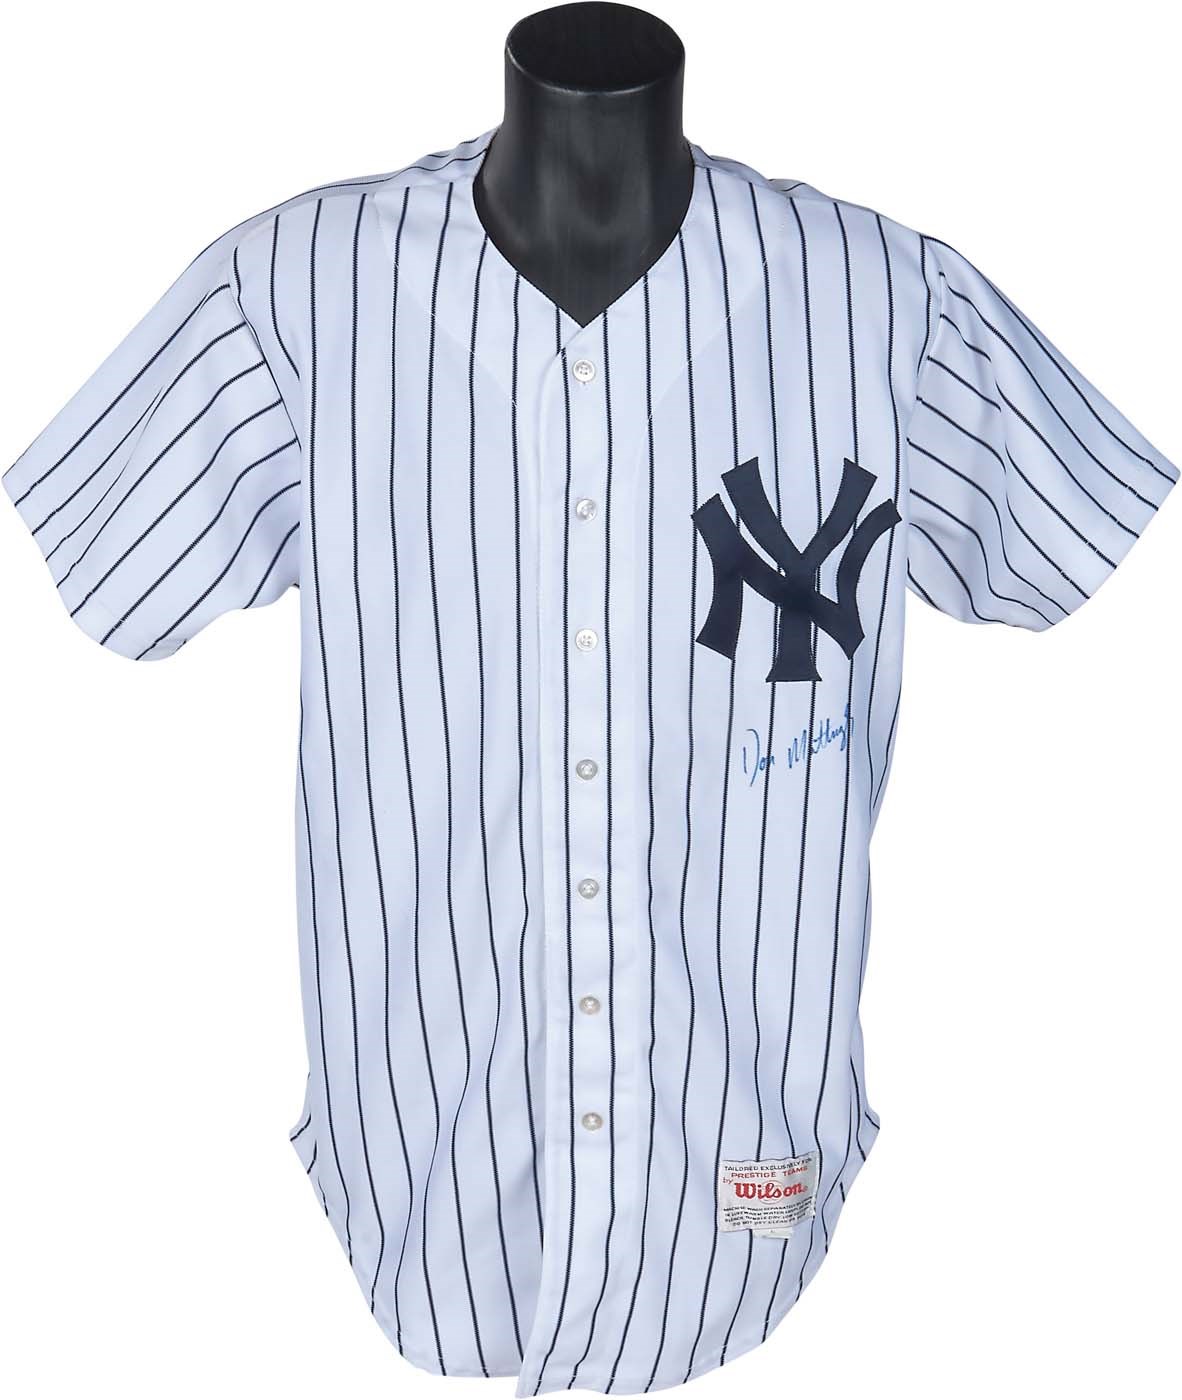 NY Yankees, Giants & Mets - 1989 Don Mattingly New York Yankees Game Worn Jersey